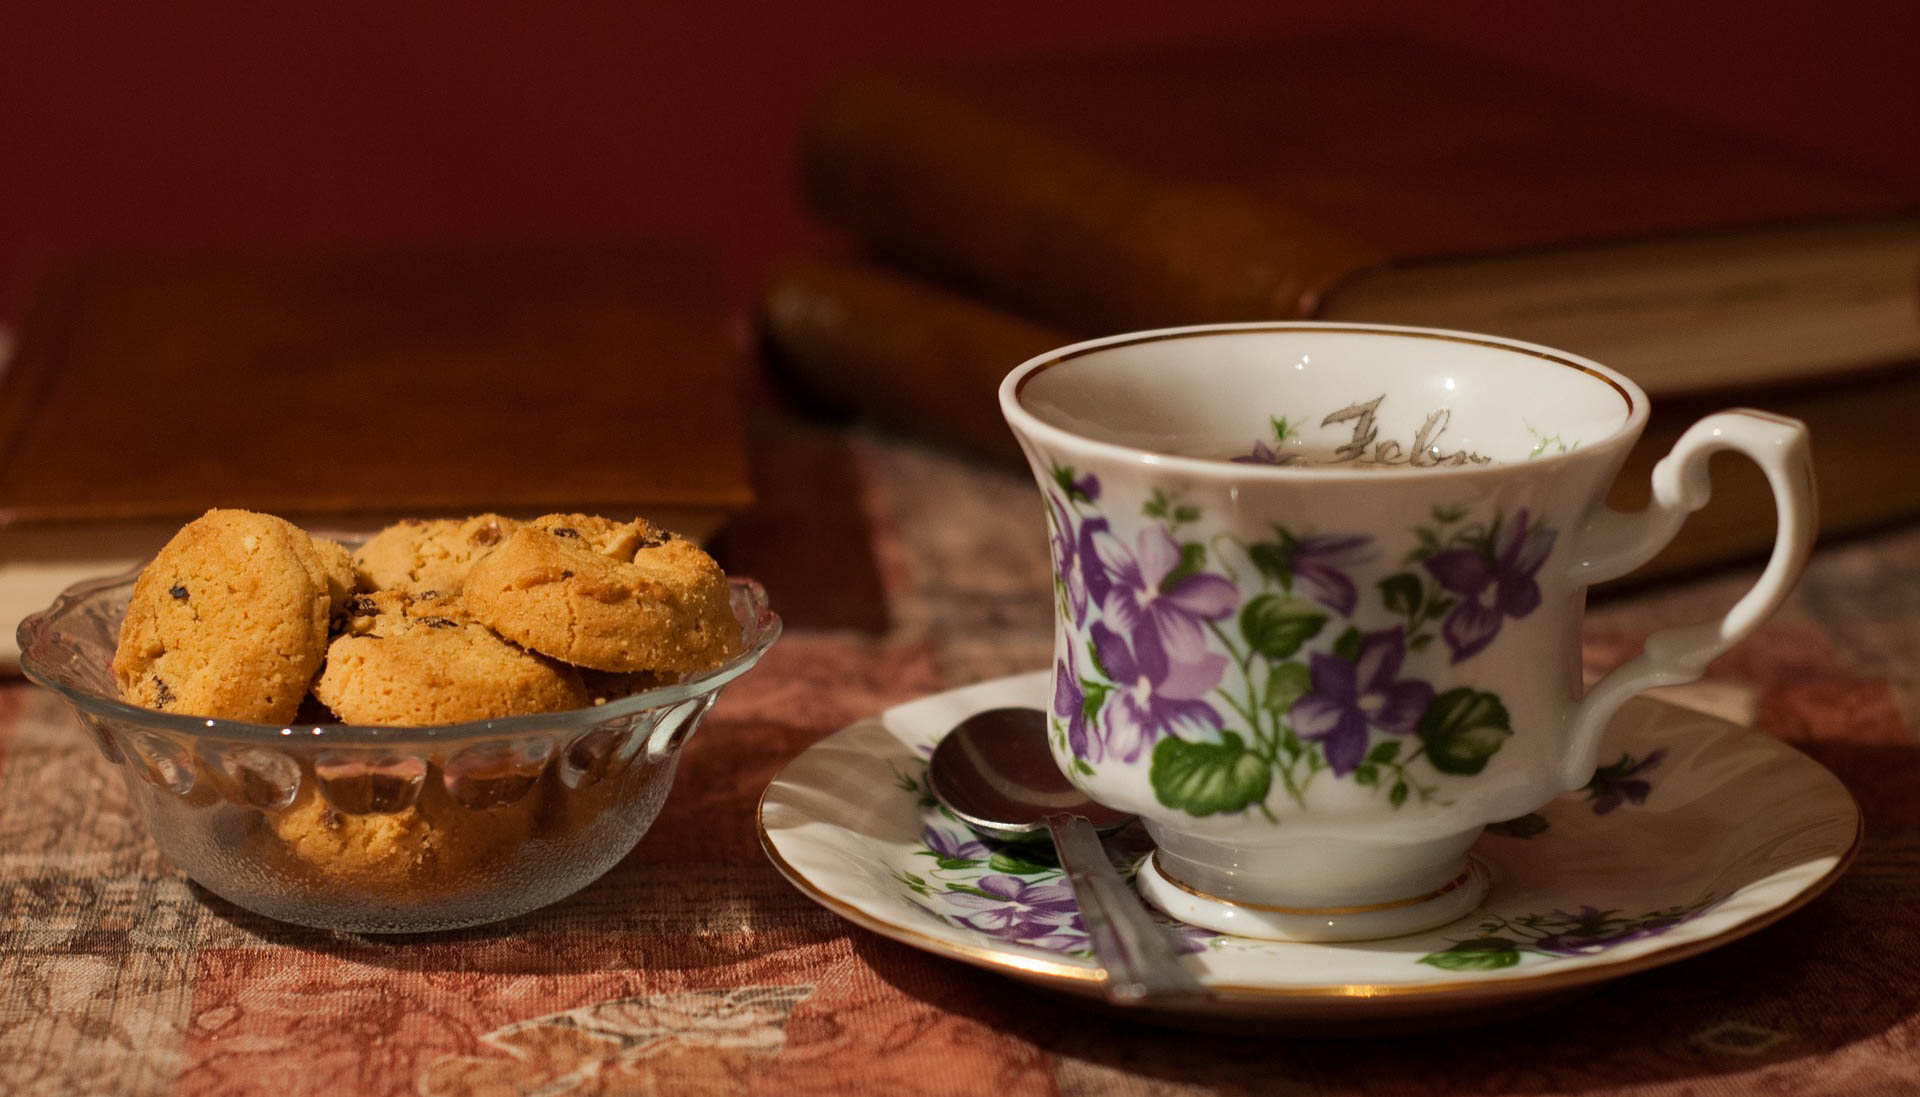 Biscuits and Tea – The Art of Indulgence